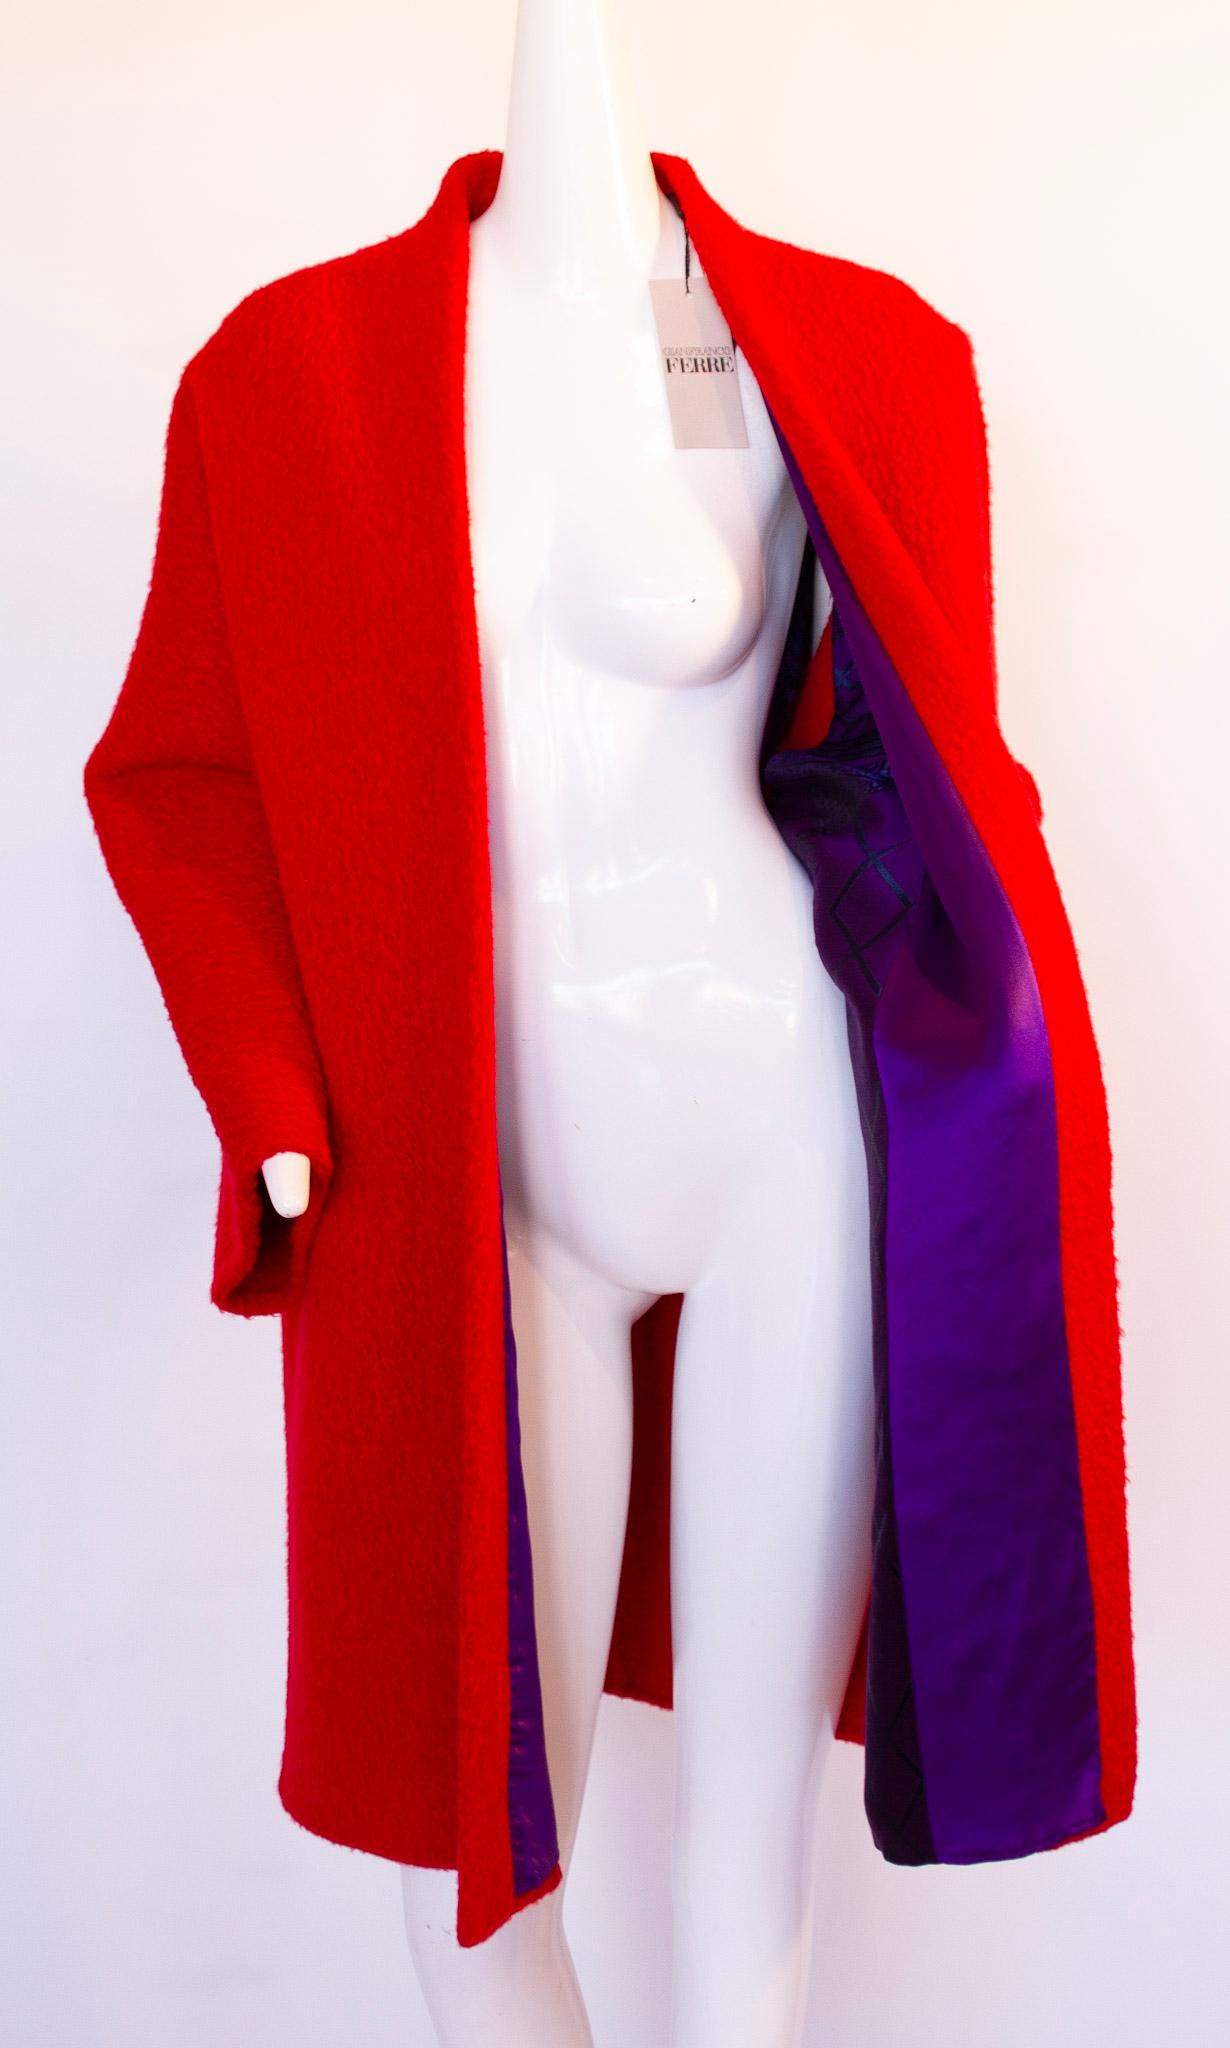 Gianfranco Ferre, Circa 1978
Oversized, Red, Cocoon Coat
70% Wool, 30% Alpaca
Interior Purple Design Lining
Hidden Side Pockets
Architectural and Minimalist Design
NWT
Made in Italy
Size IT40